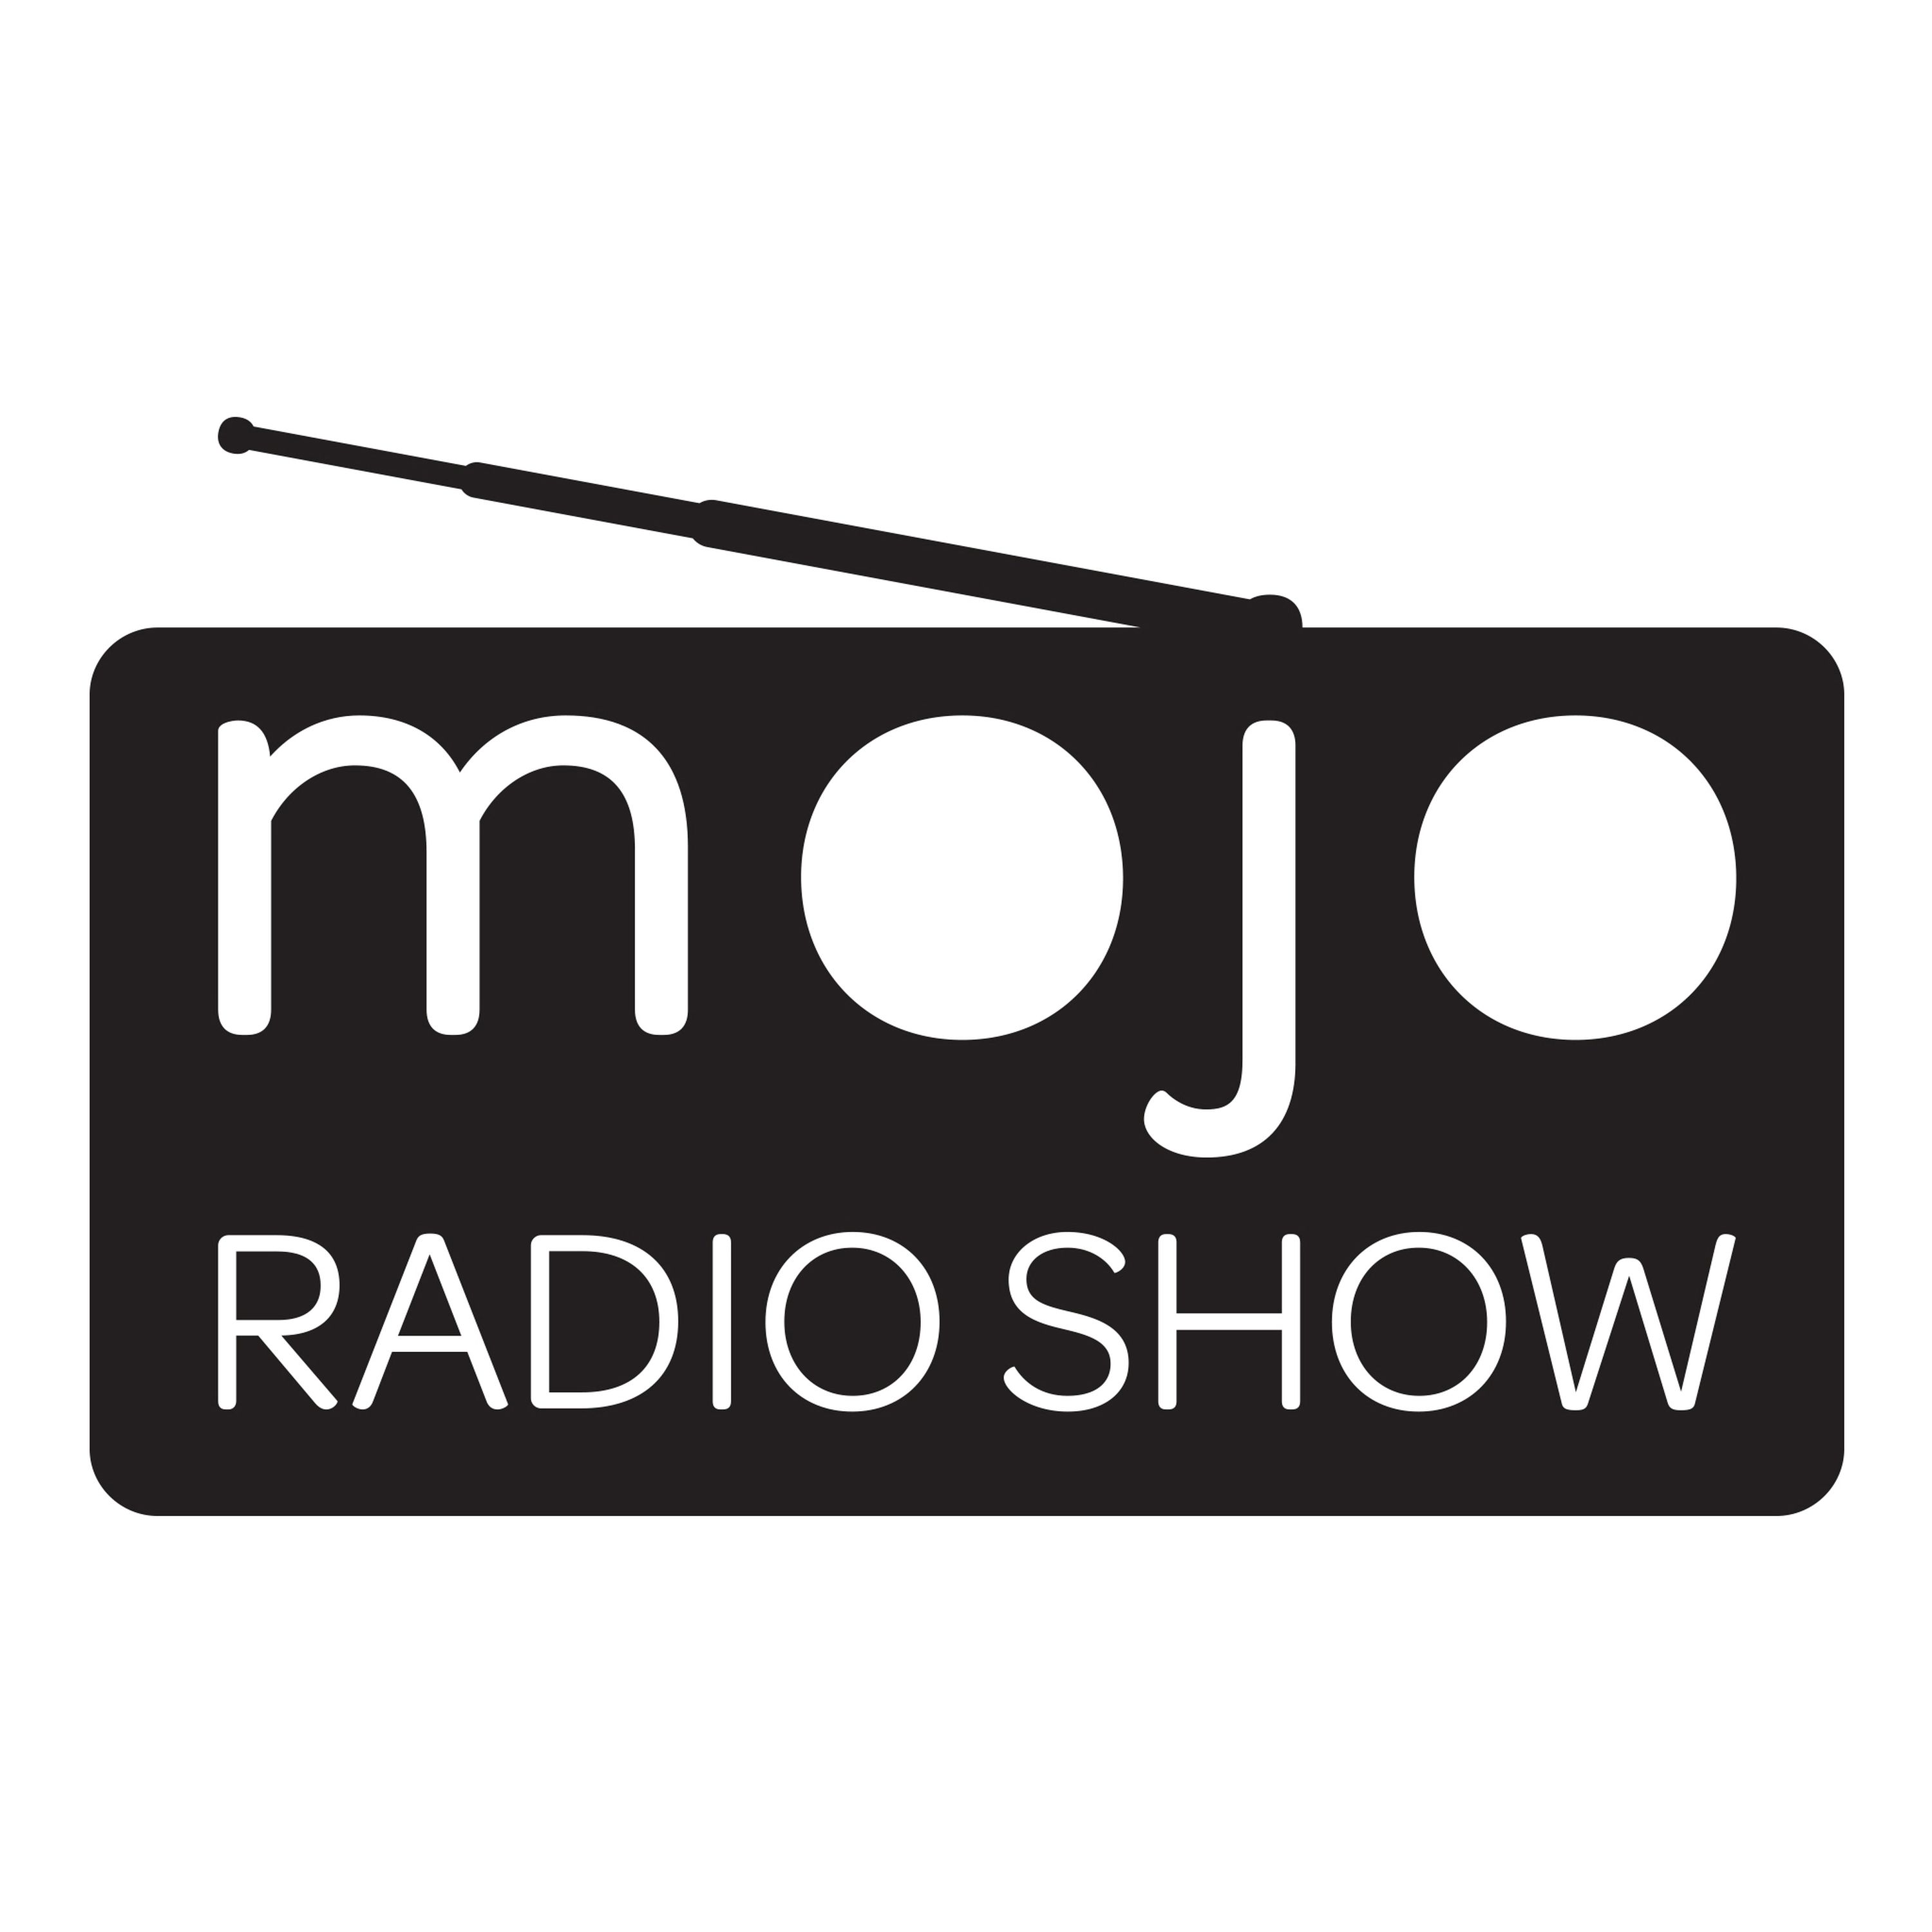 The Mojo Radio Show EP 146: Are You Ready For What’s Next? It’s Closer Than You Think - Kaila Colbin